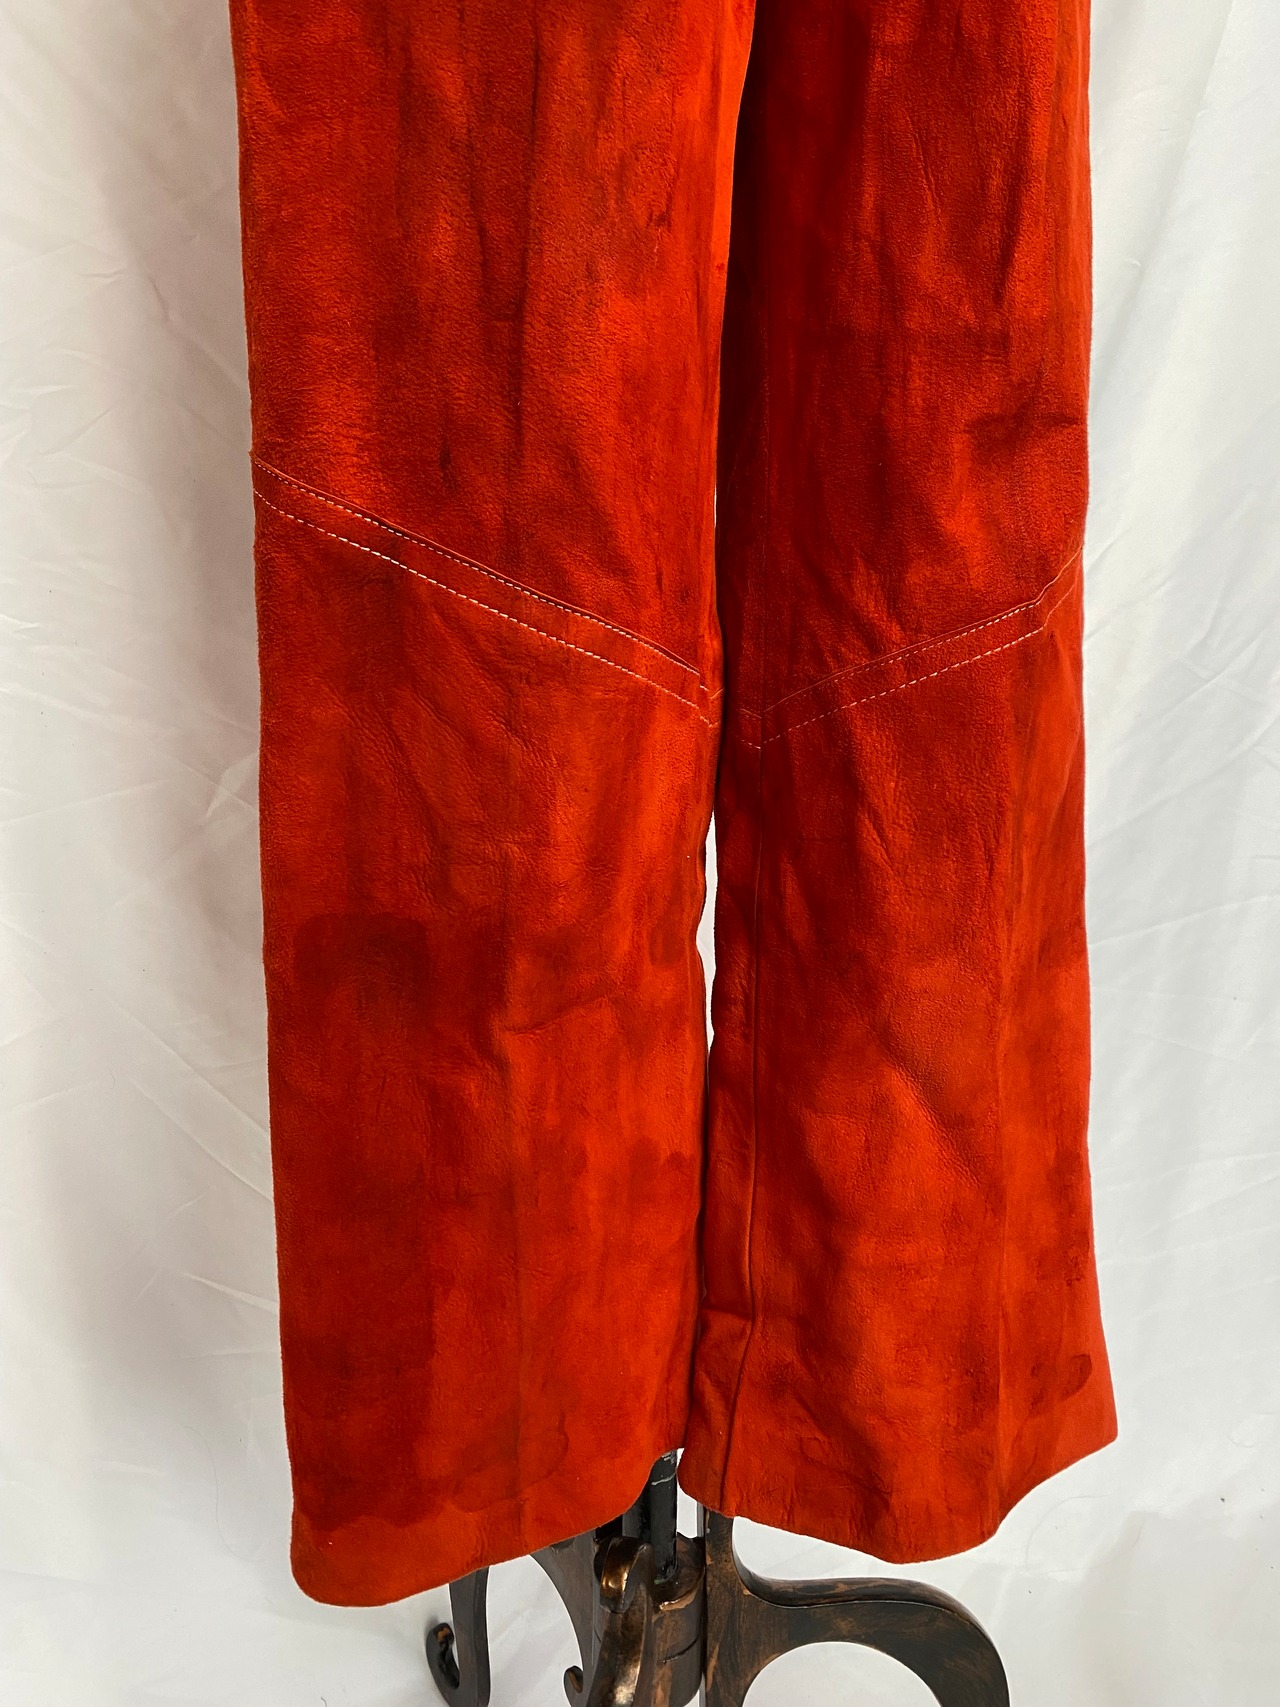 60-70’s “Inperial lather & sportswear” Lather pants Made in Canada